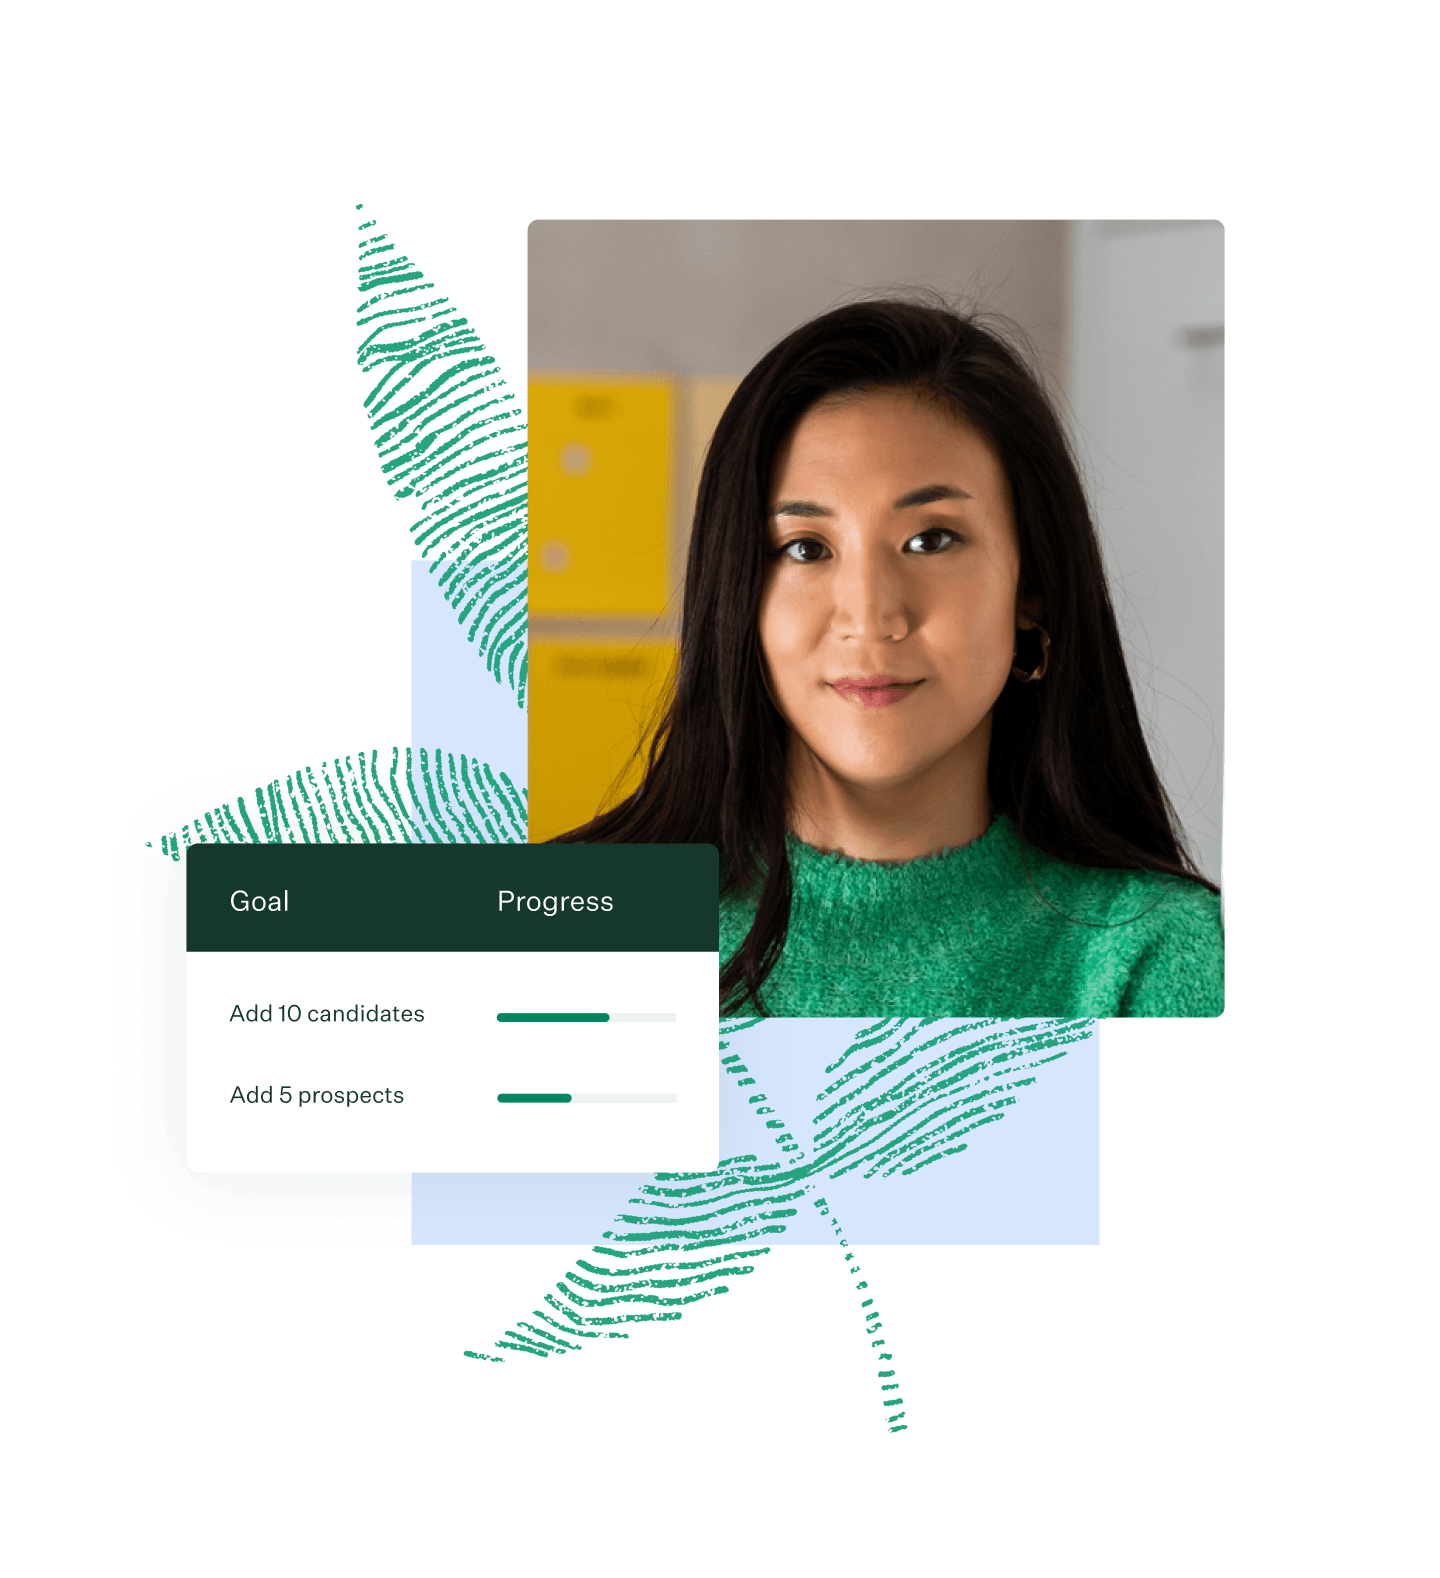 Collage with Goals UI and image of smiling woman wearing green sweater with green fingerprint on blue color block